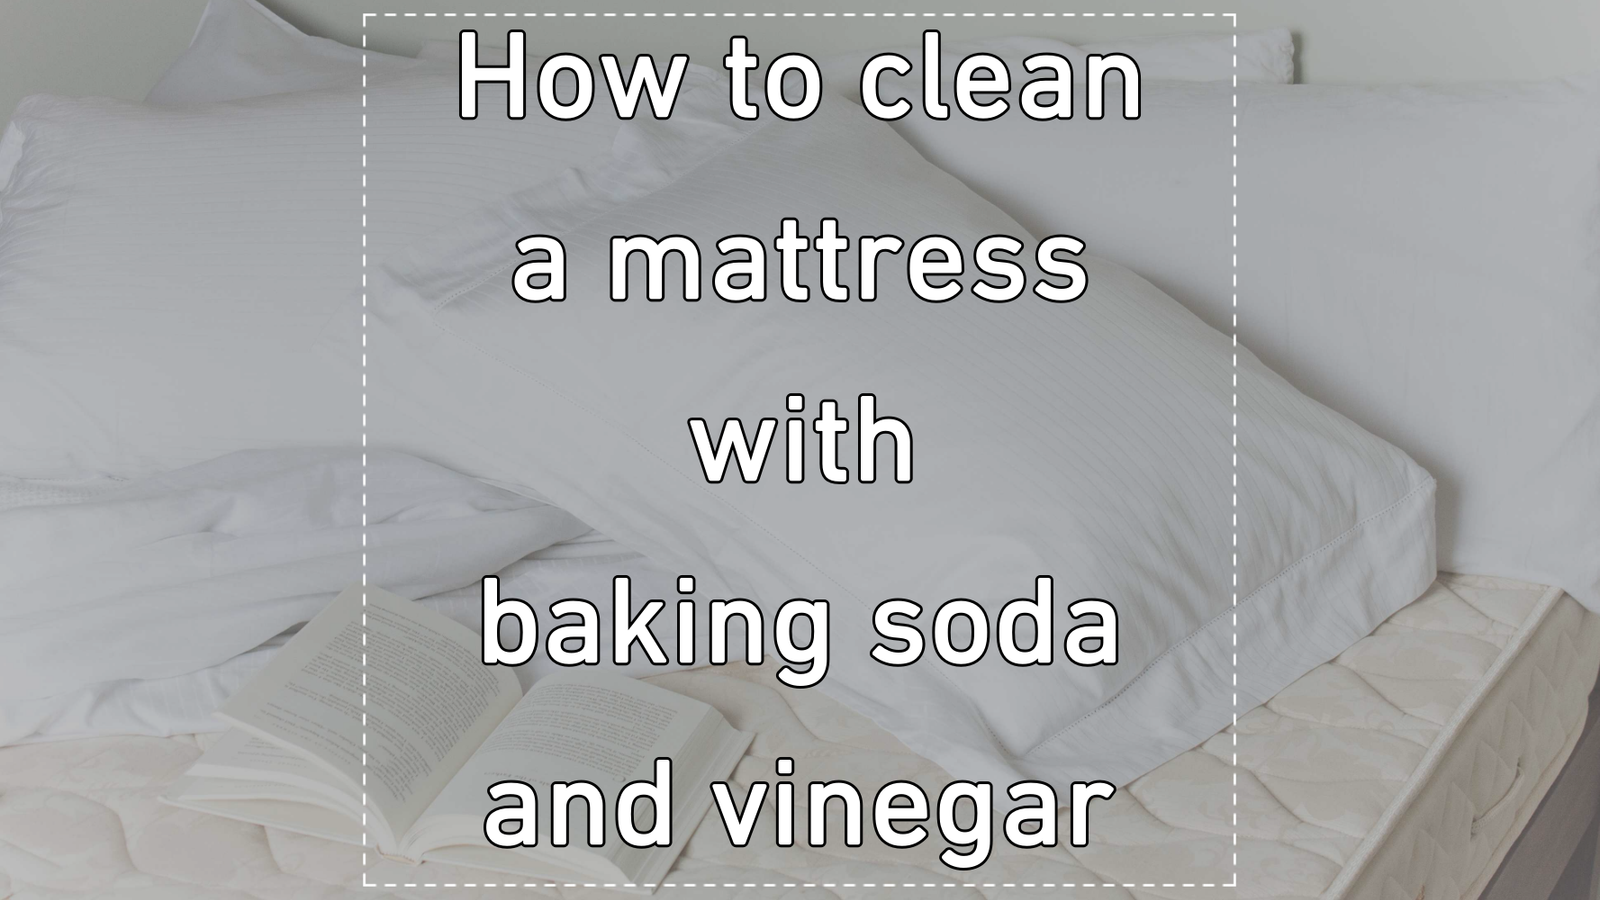 How to clean a mattress with baking soda and vinegar